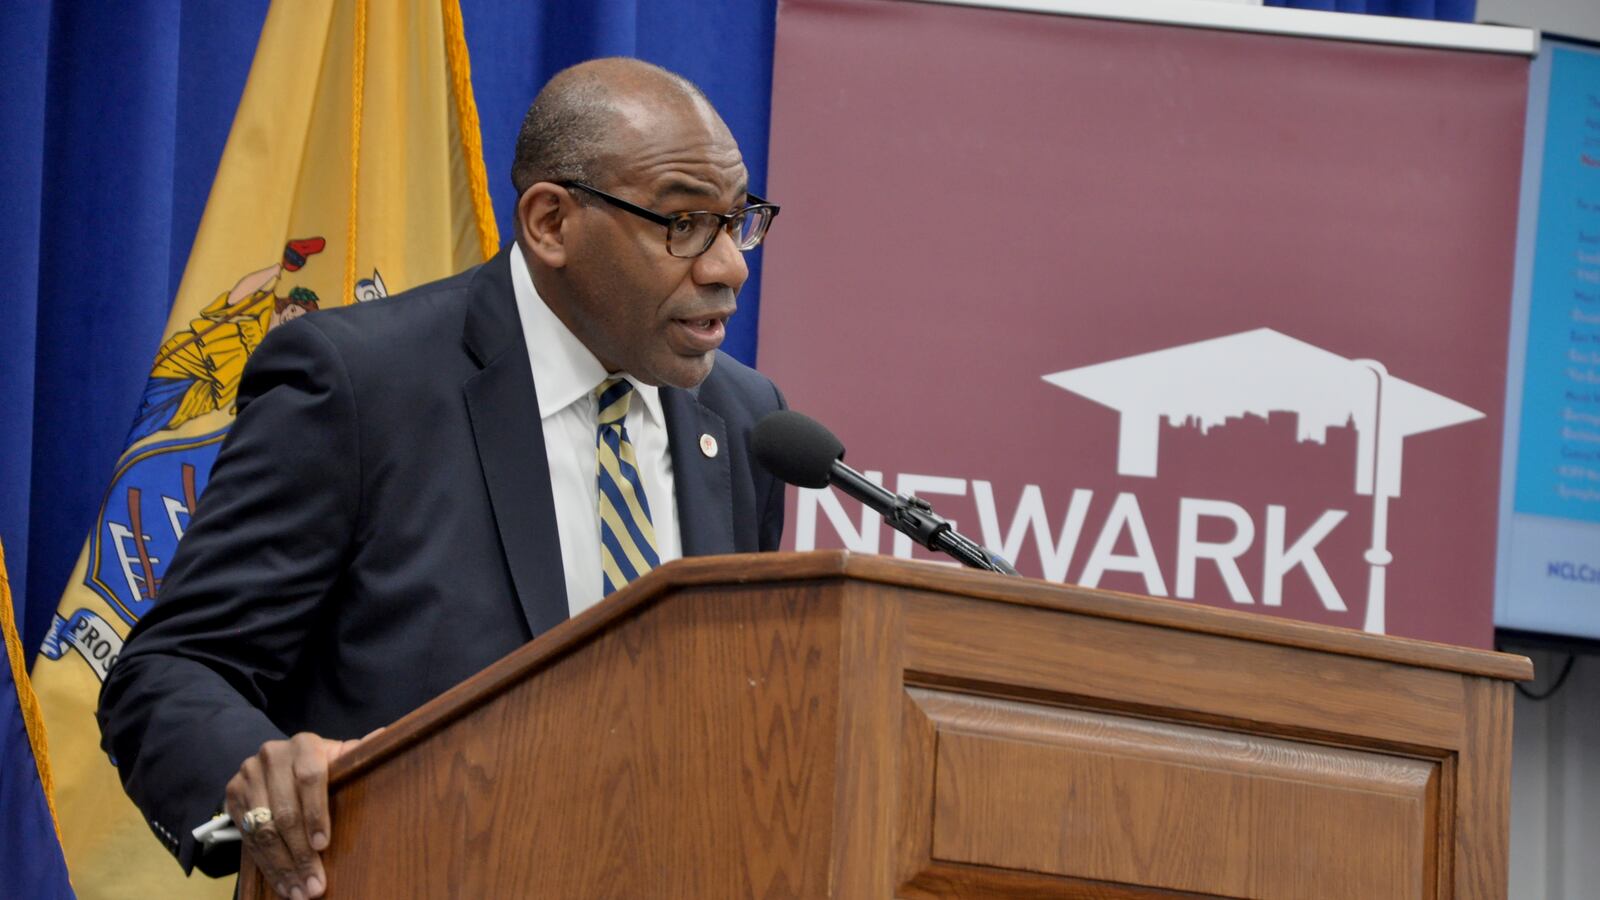 Reginald Lewis, executive director of the Newark City of Learning Collaborative, announces the launch of the campaign on Thursday at City Hall.